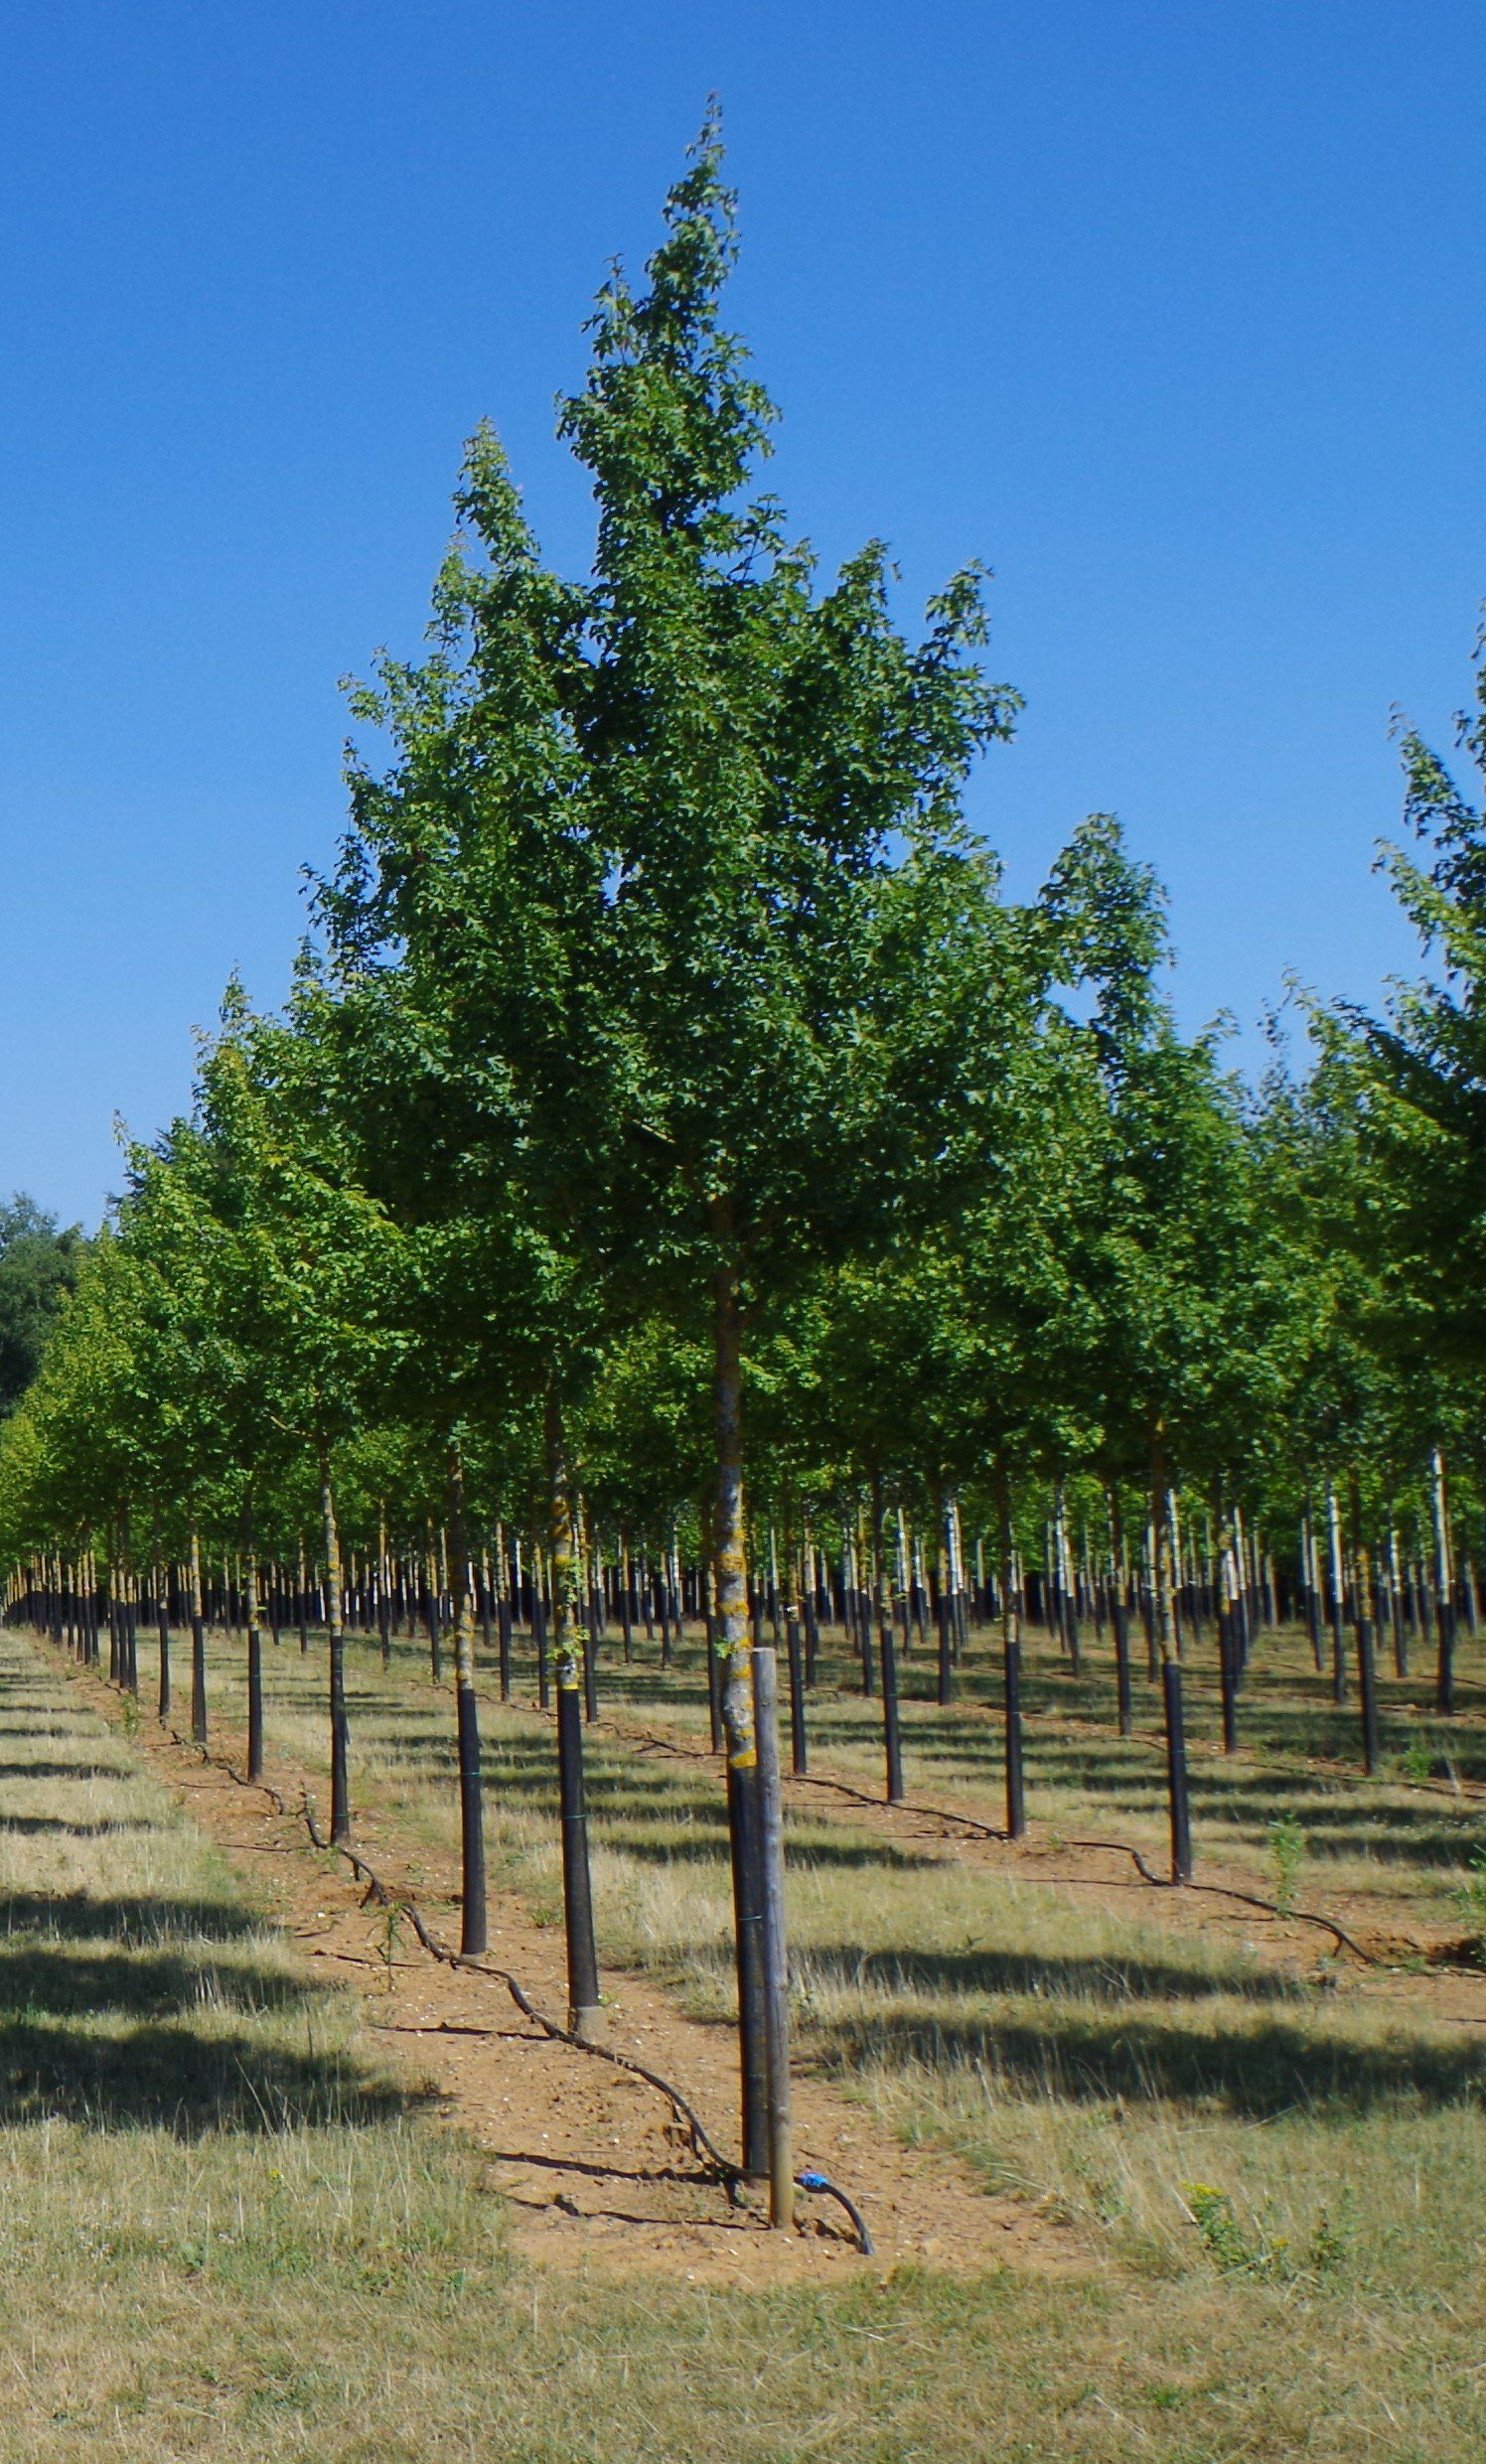 Acer campestre Streetwise trees growing in field